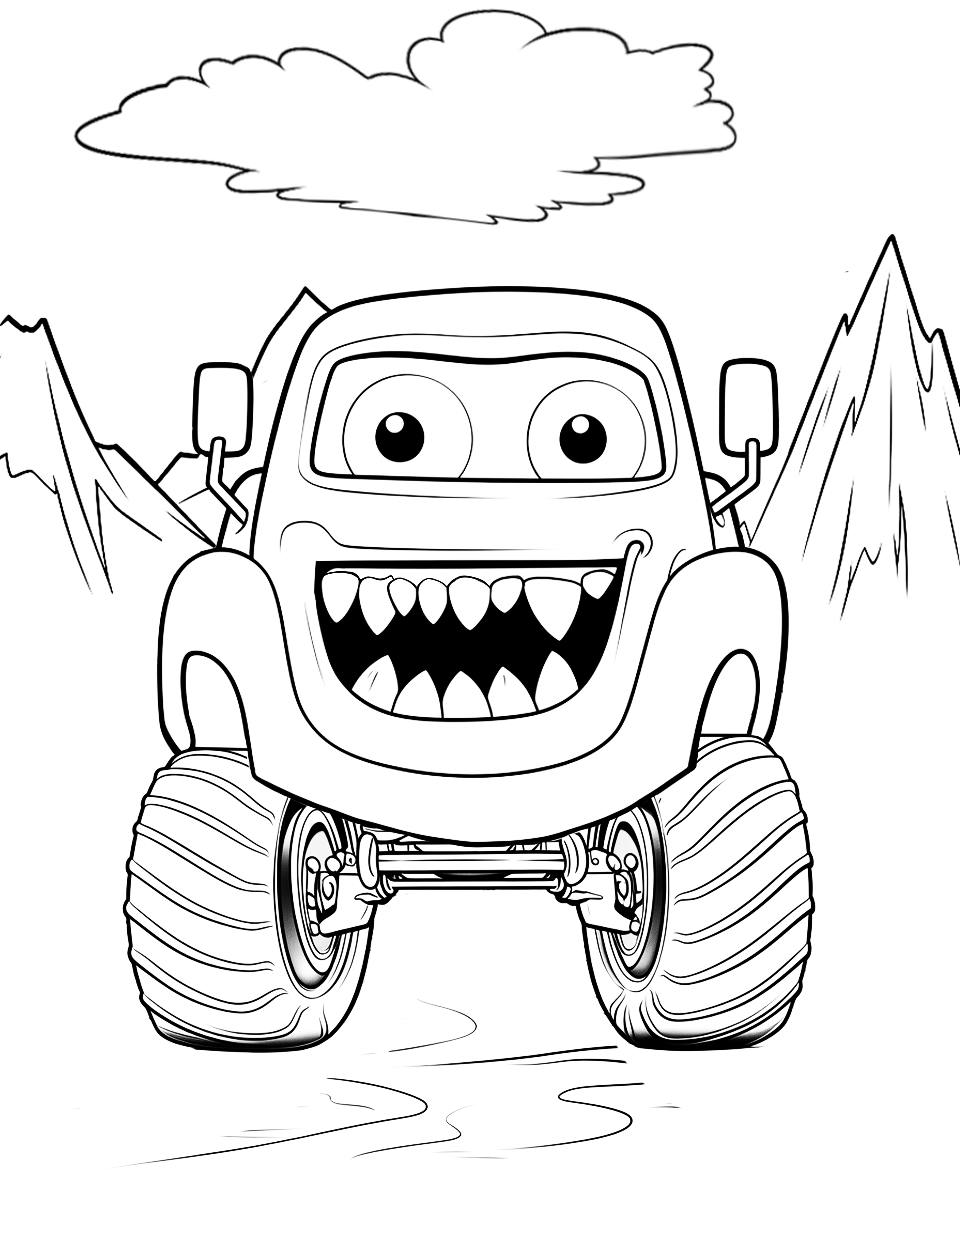 Cute Monster Truck Coloring Page - A cute-looking monster truck with big eyes and a big smile with teeth.